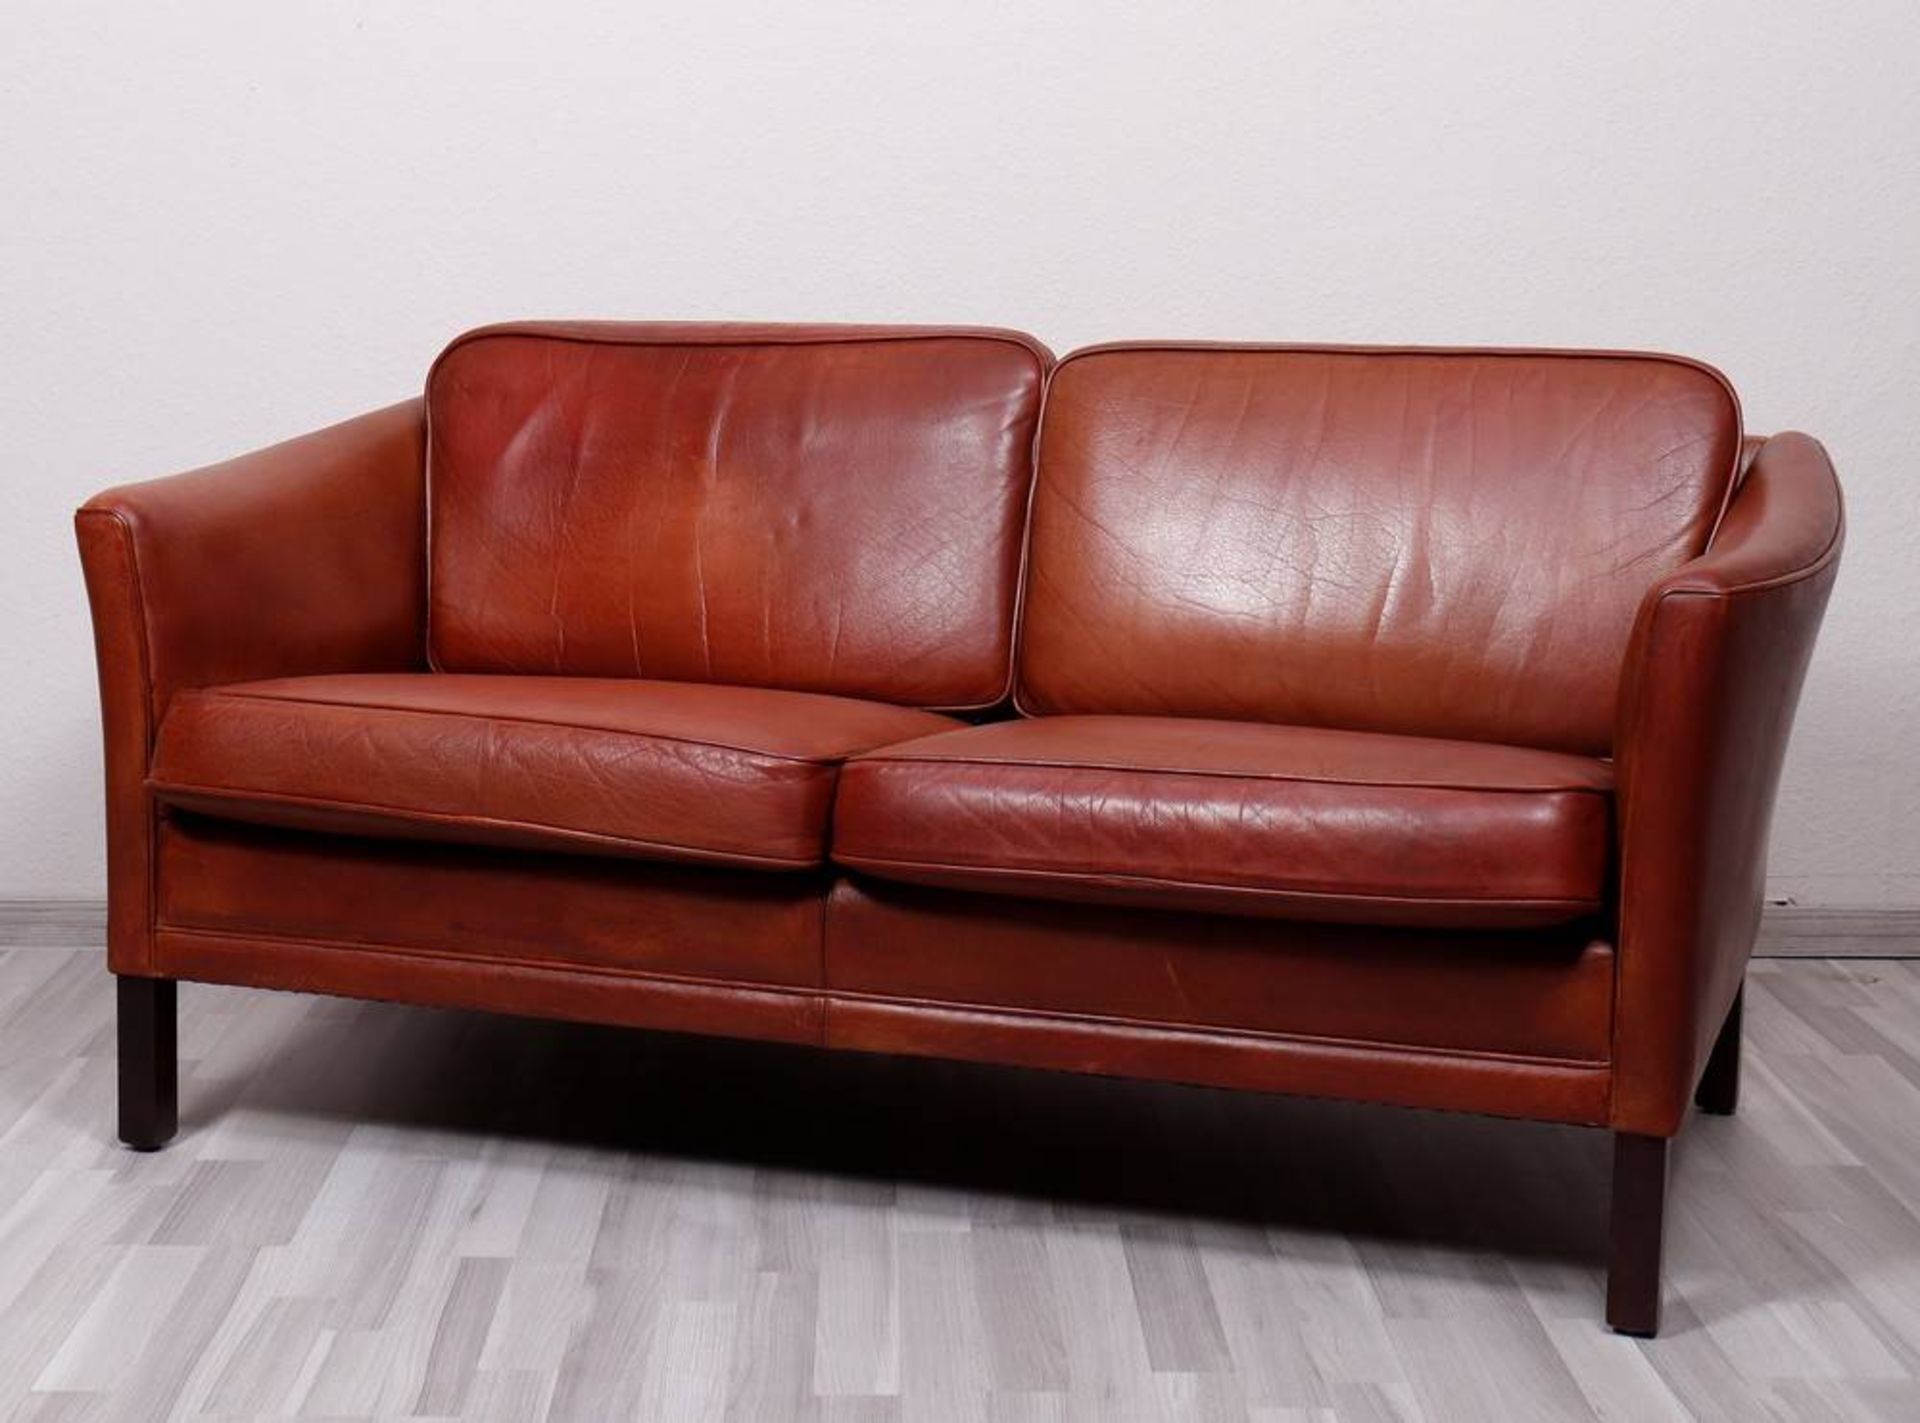 Two-seater sofa, Denmark, 20th C., in the Mogensen style